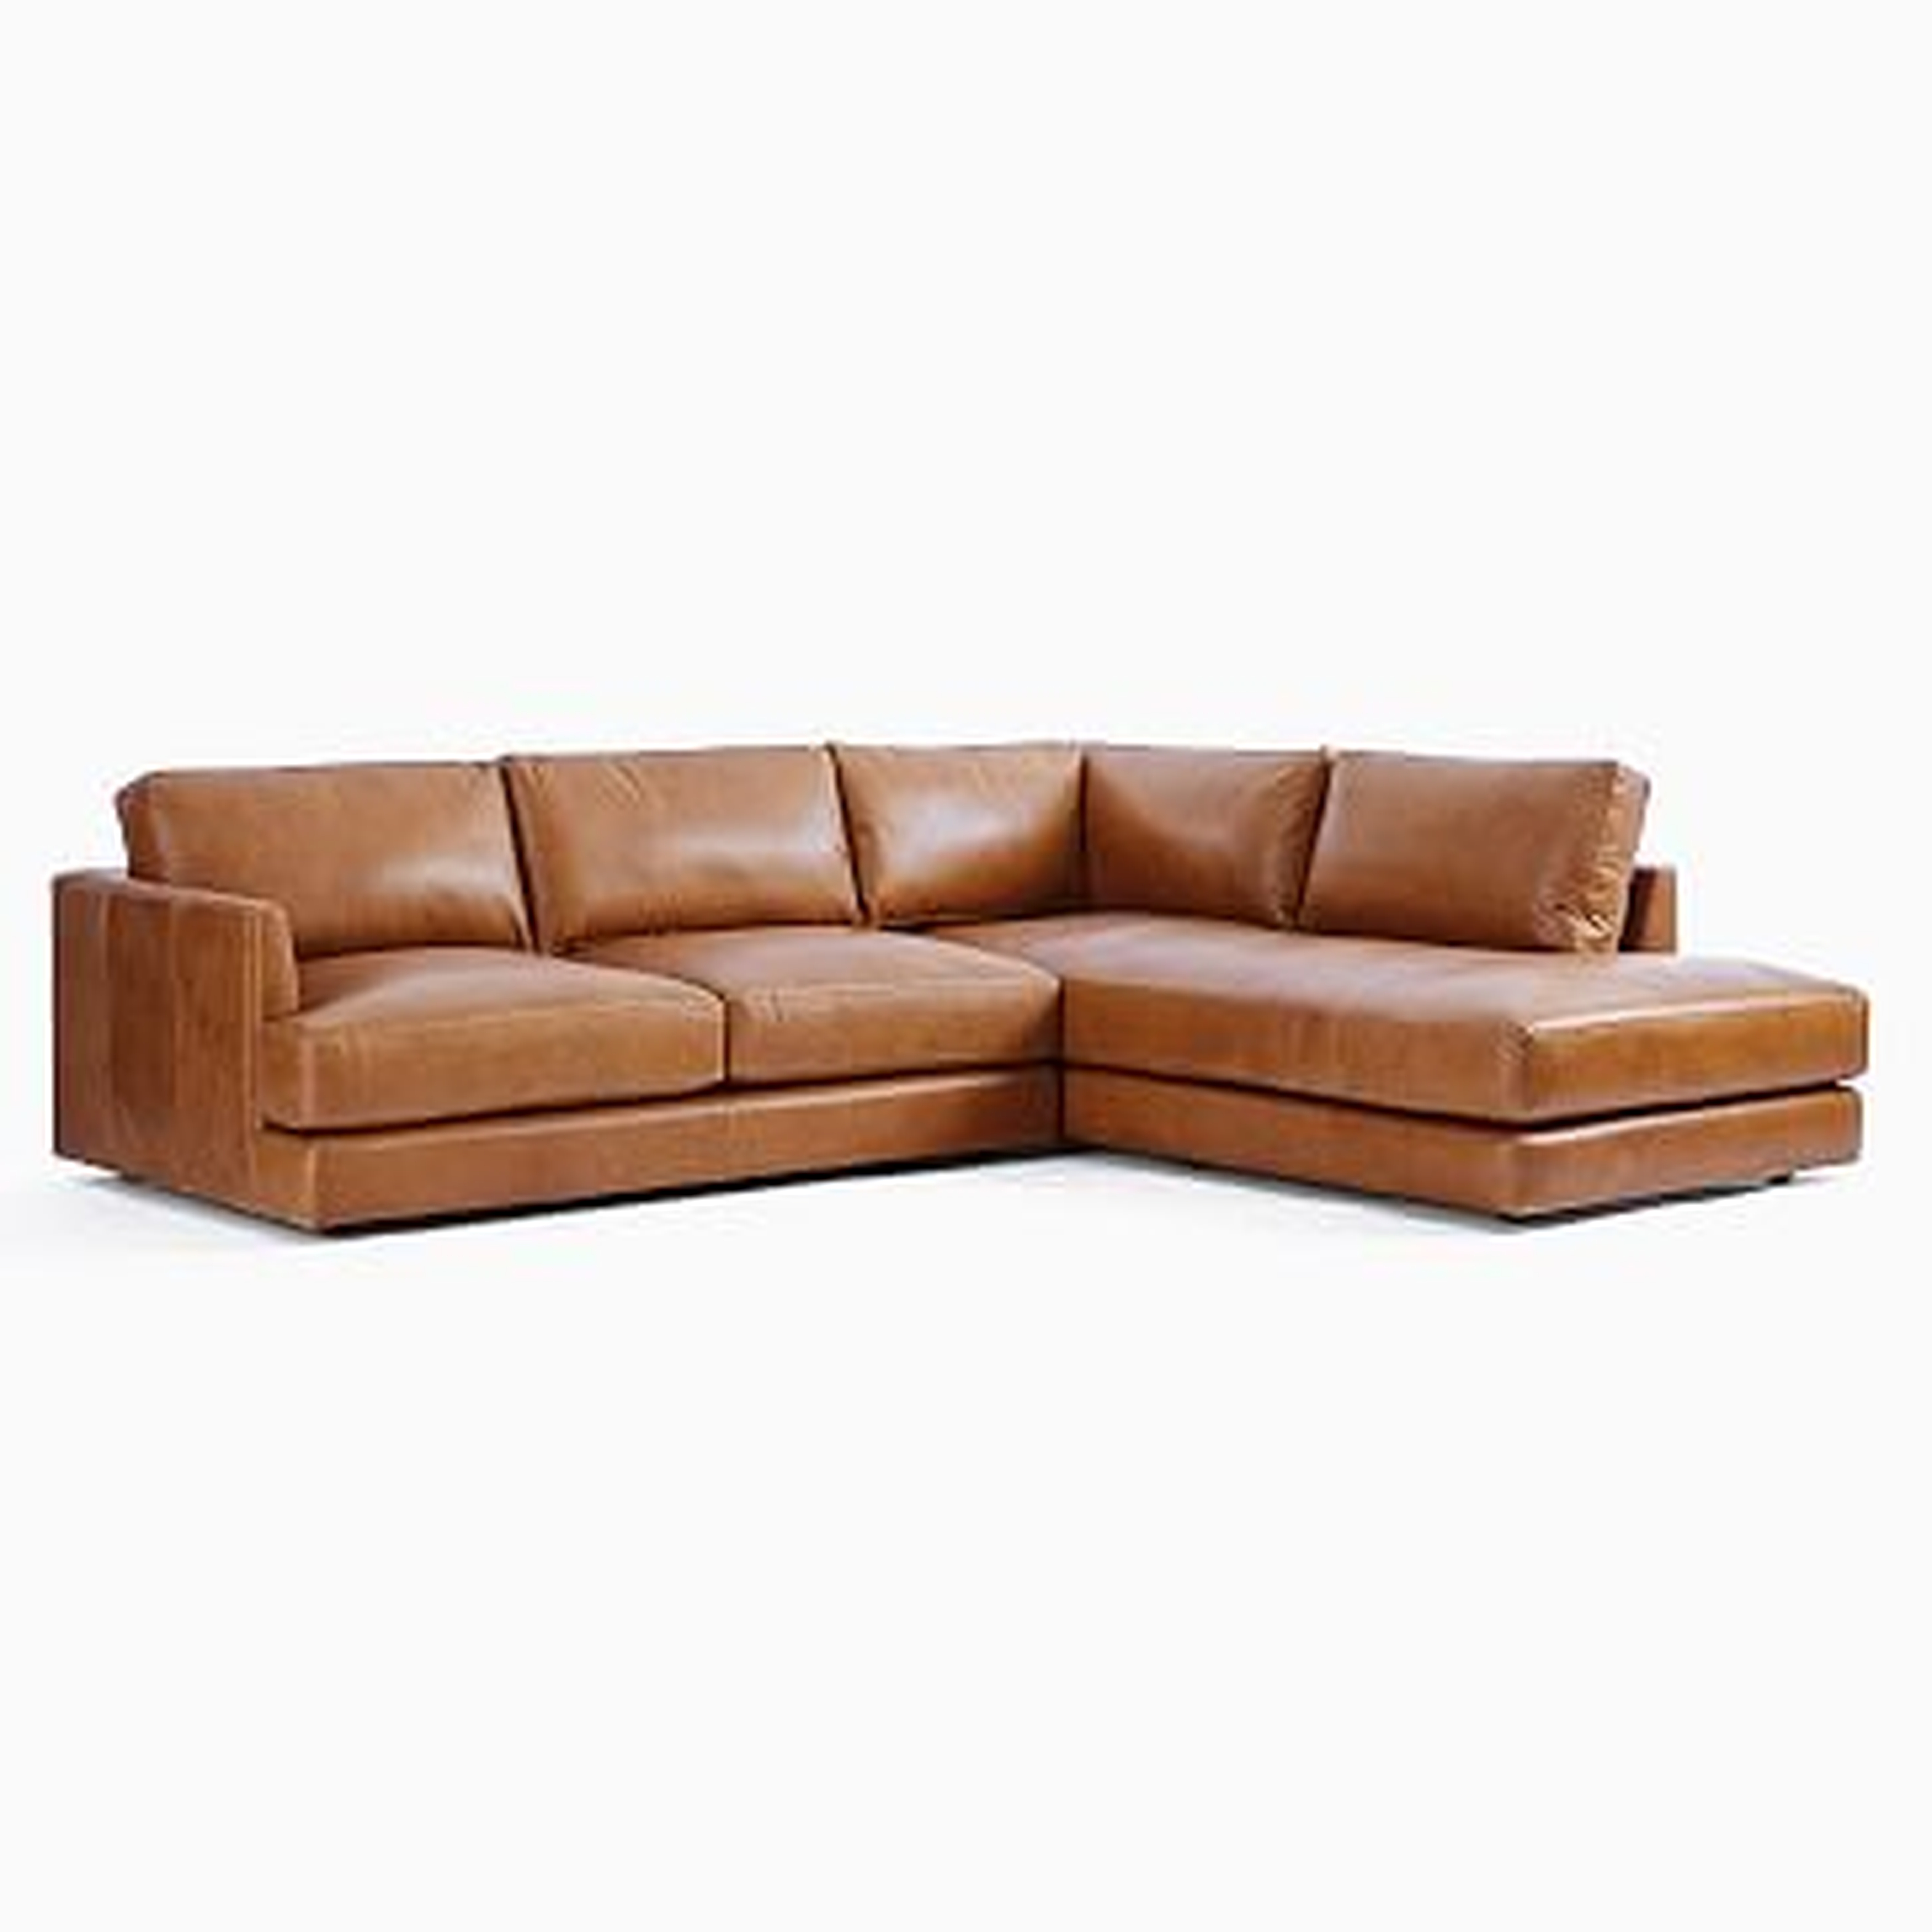 Haven Sectional Set 01: Left Arm Sofa, Right Arm Terminal Chaise, Poly, Saddle Leather, Nut - West Elm